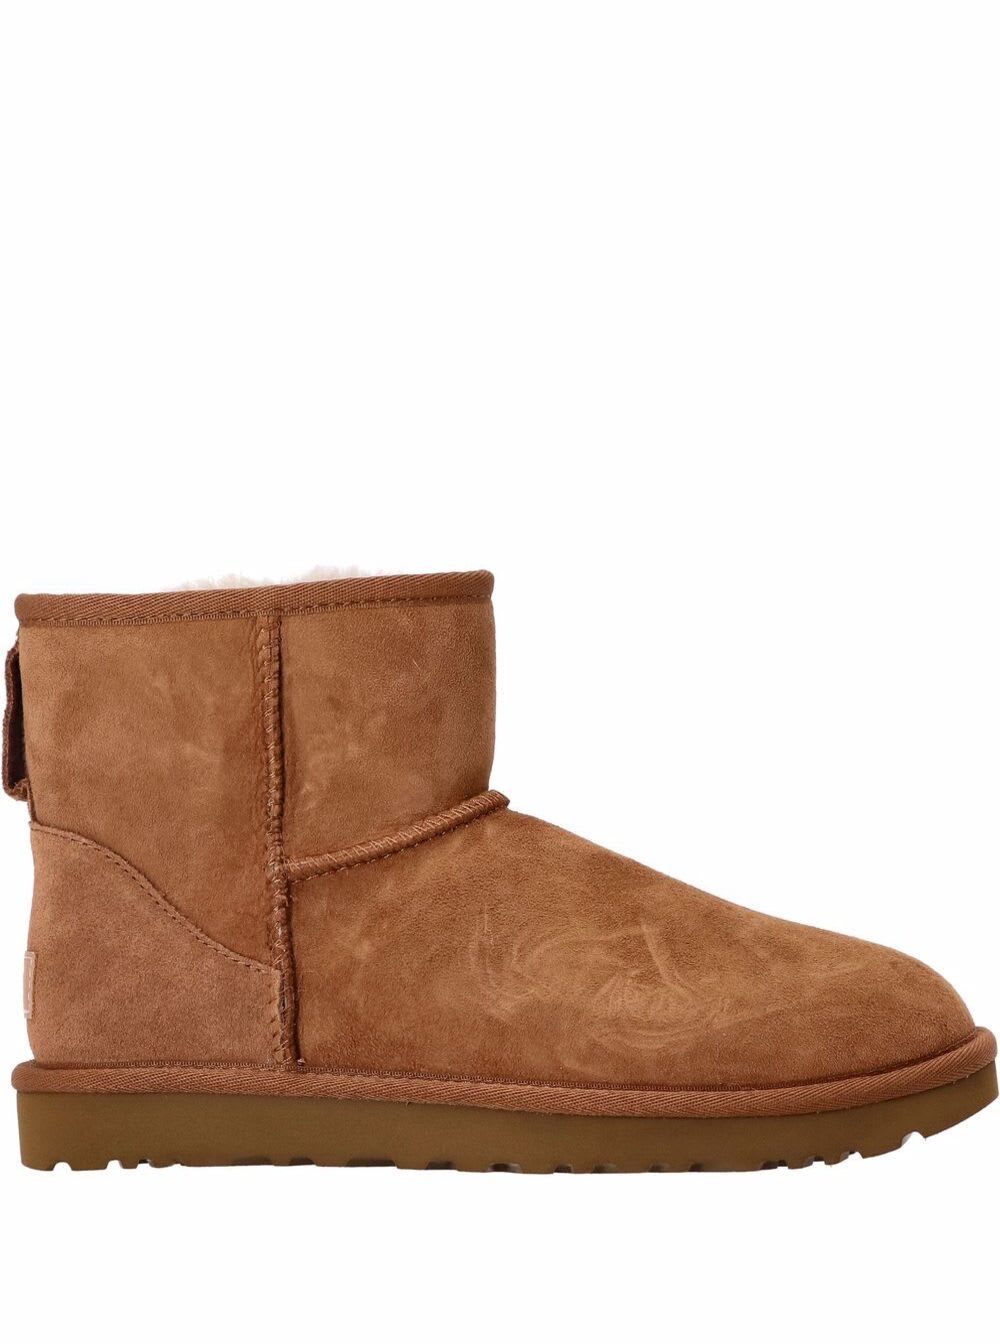 Classic Mini Brown Leather Boots Ugg Woman